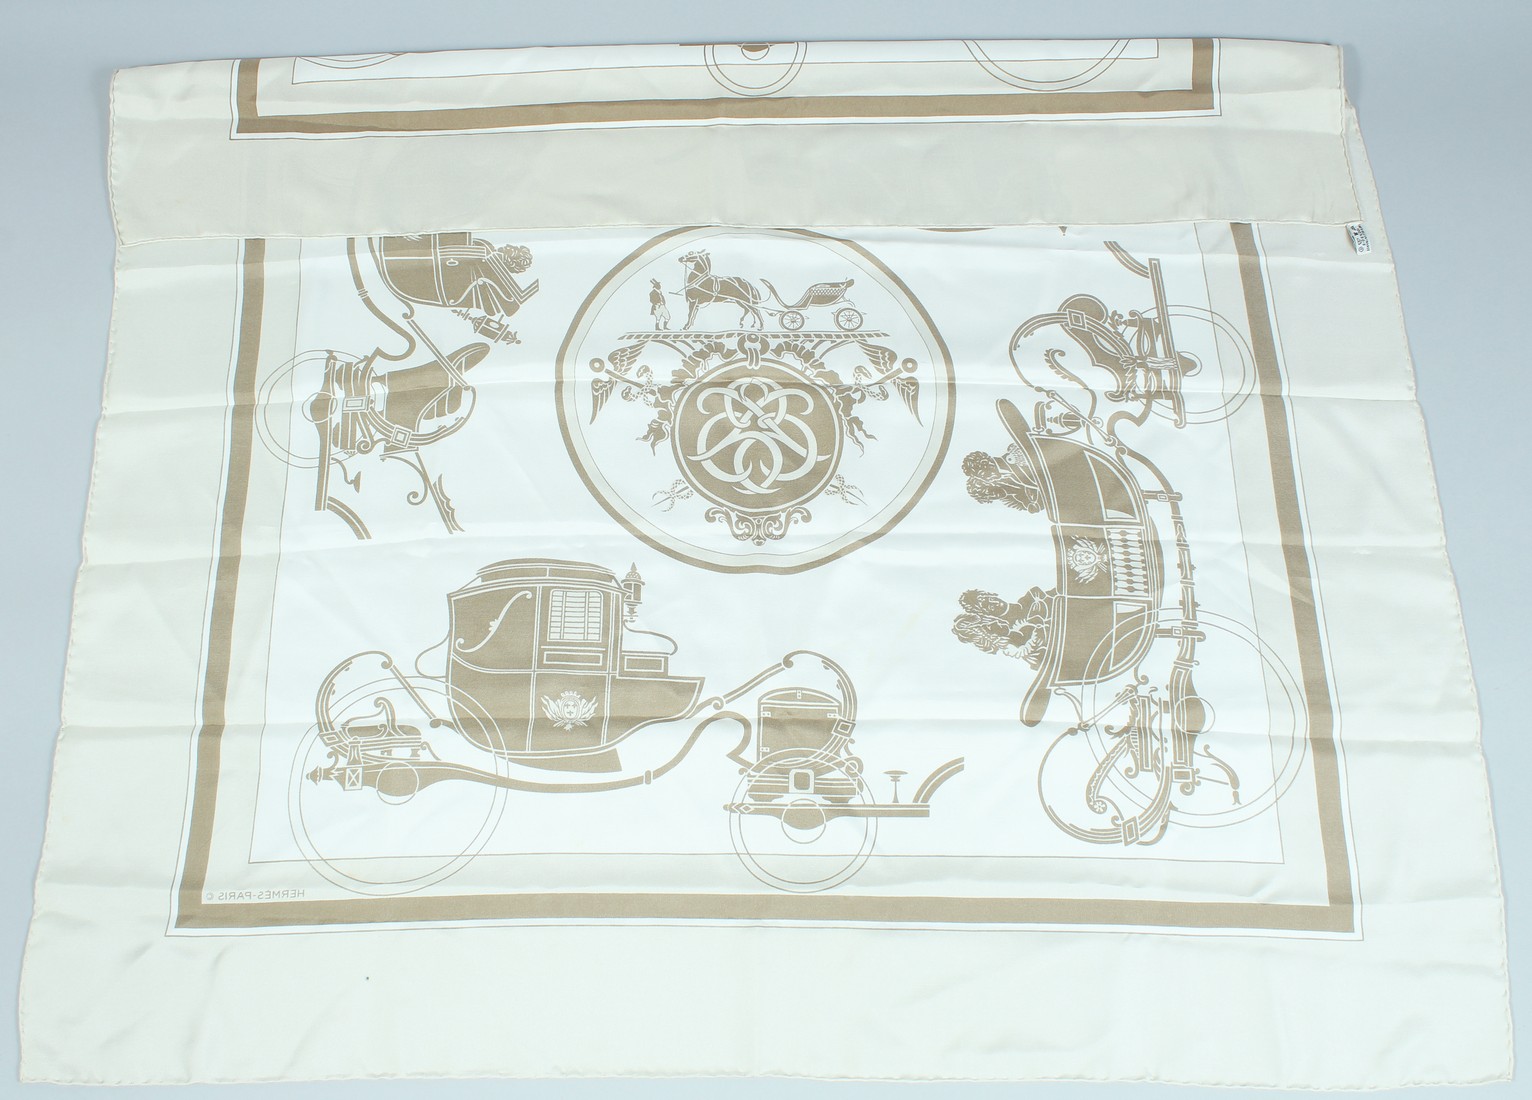 A HERMES SILK SCARF, horse and carriage. 32ins x 32ins.